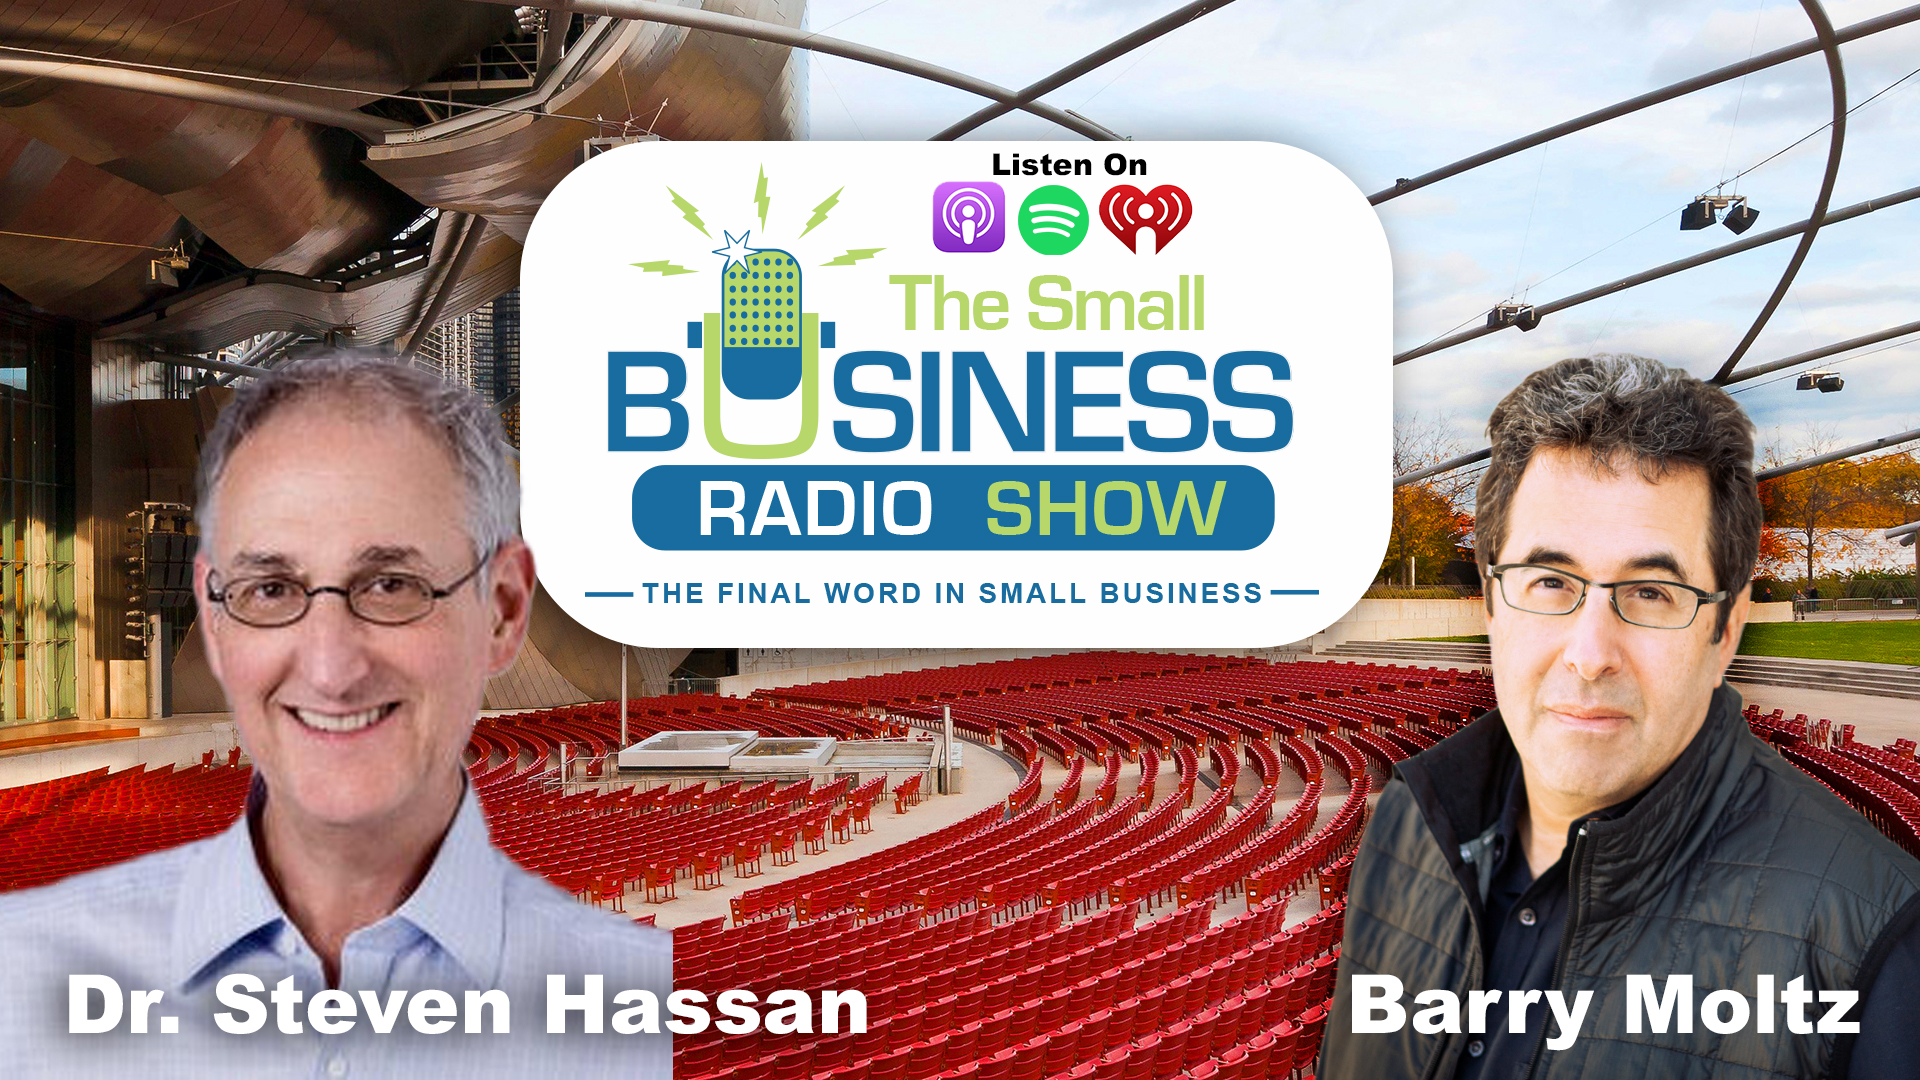 Dr. Steven Hassan on The Small Business Radio Show